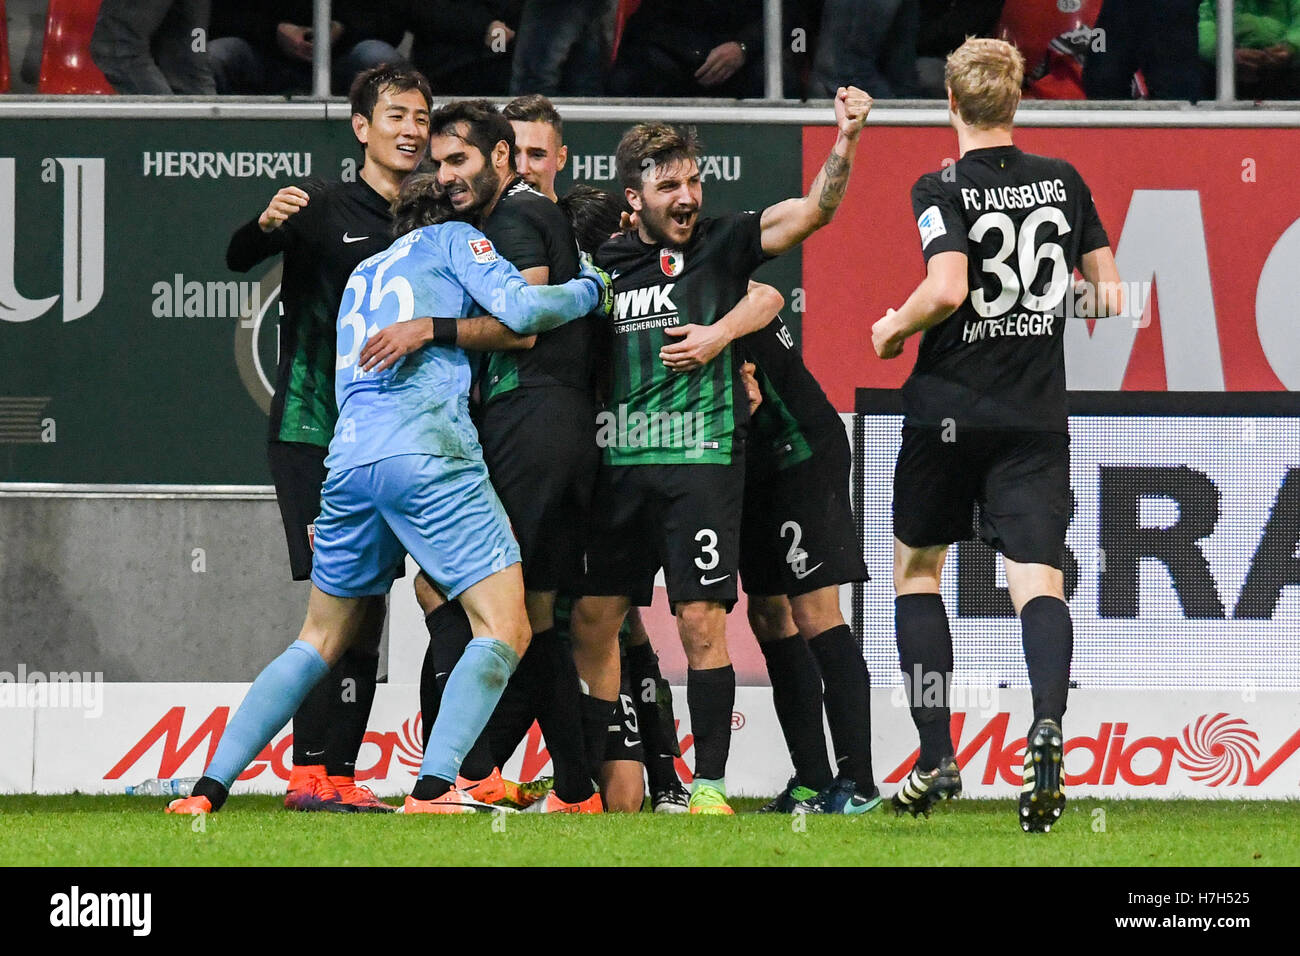 Ingolstadt, Germany. 5th Nov, 2016. Augsburg's players celebrate the score 0:2 against Ingolstadt during the soccer match between FC Ingolstadt o4 and FC Augsburg on the tenth match day of the Bundesliga at Audi Sportpark in Ingolstadt, Germany, 5 November 2016. PHOTO: ARMIN WEIGEL/dpa (ATTENTION: Due to the accreditation guidelines, the DFL only permits the publication and utilisation of up to 15 pictures per match on the internet and in online media during the match.) Credit:  dpa/Alamy Live News Stock Photo